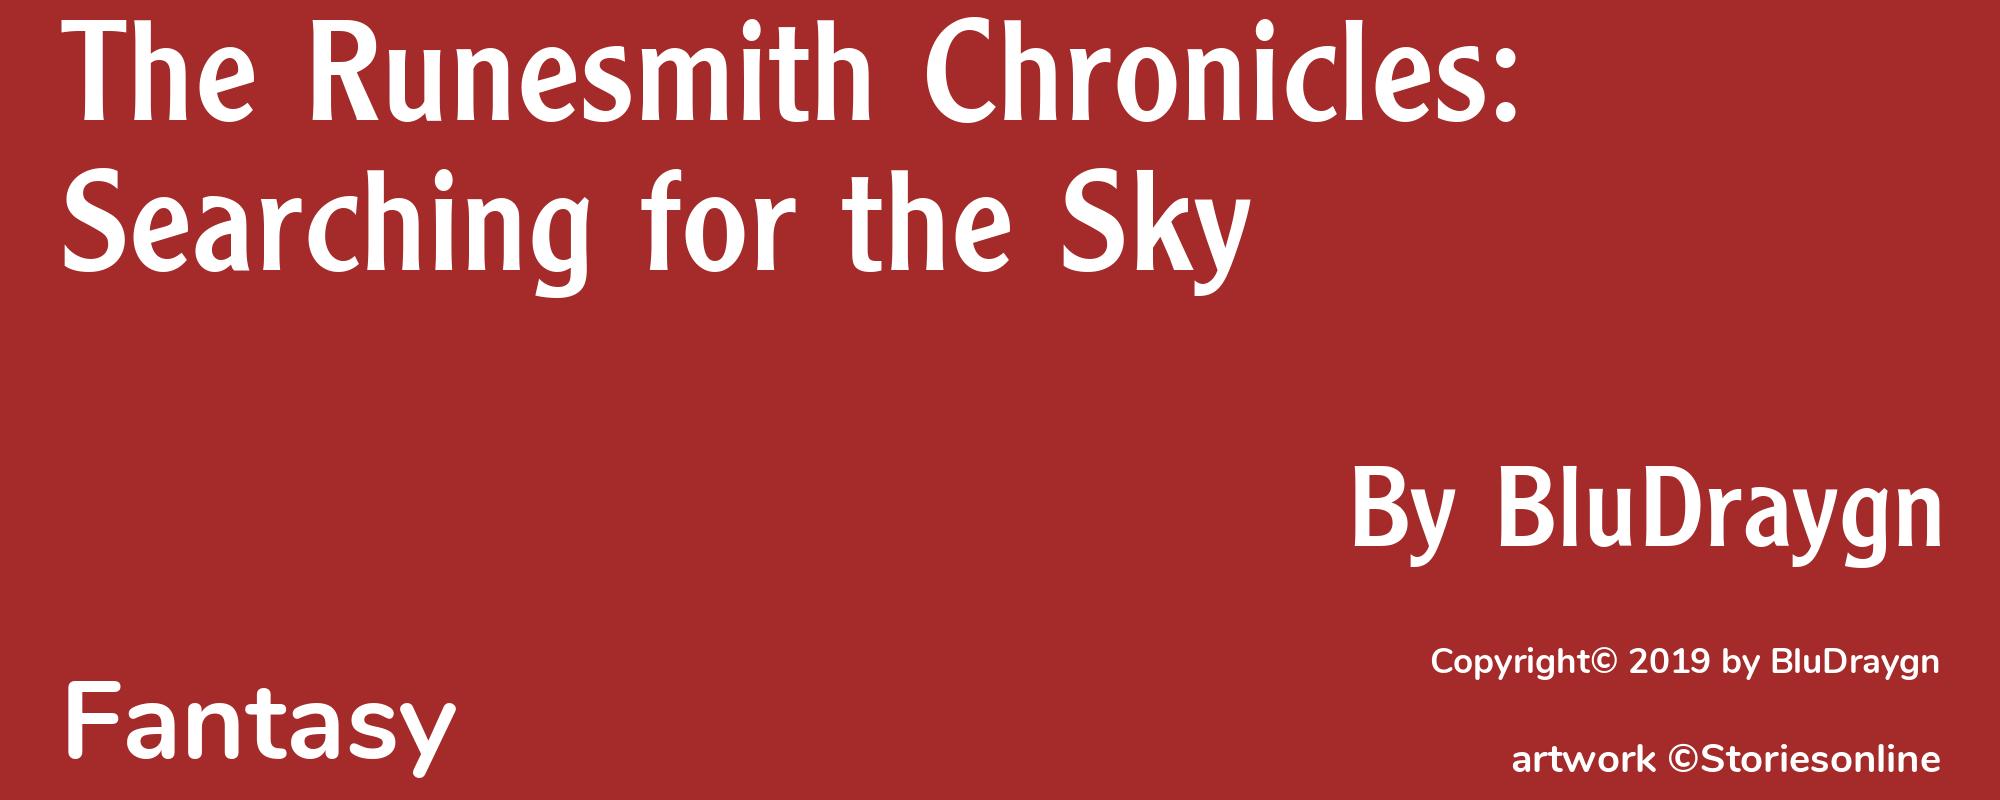 The Runesmith Chronicles: Searching for the Sky - Cover